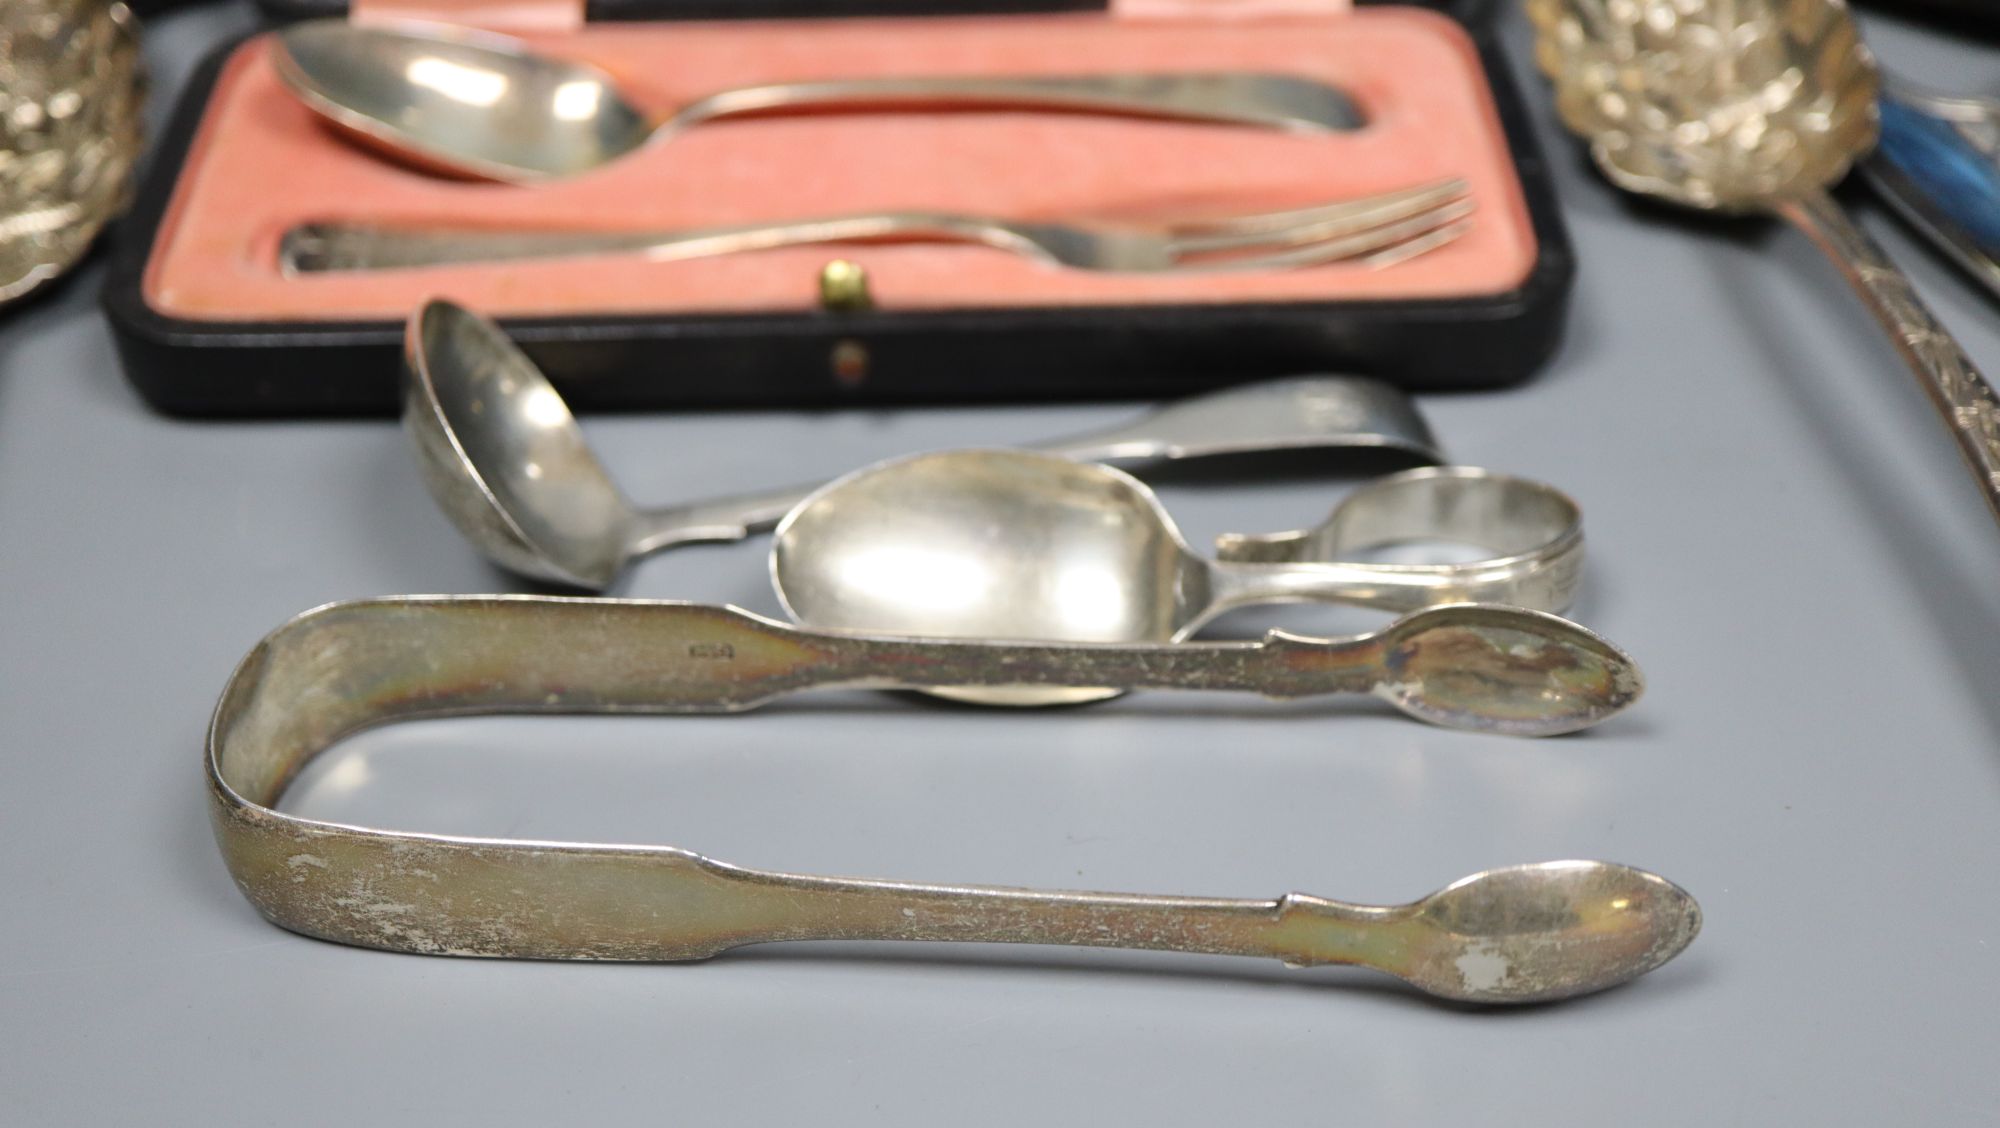 Small silver - 2 berry spoons, butter knife, ladle, feeder, christening spoon and fork. Two cased sets, tongs and a silver gilt spoon